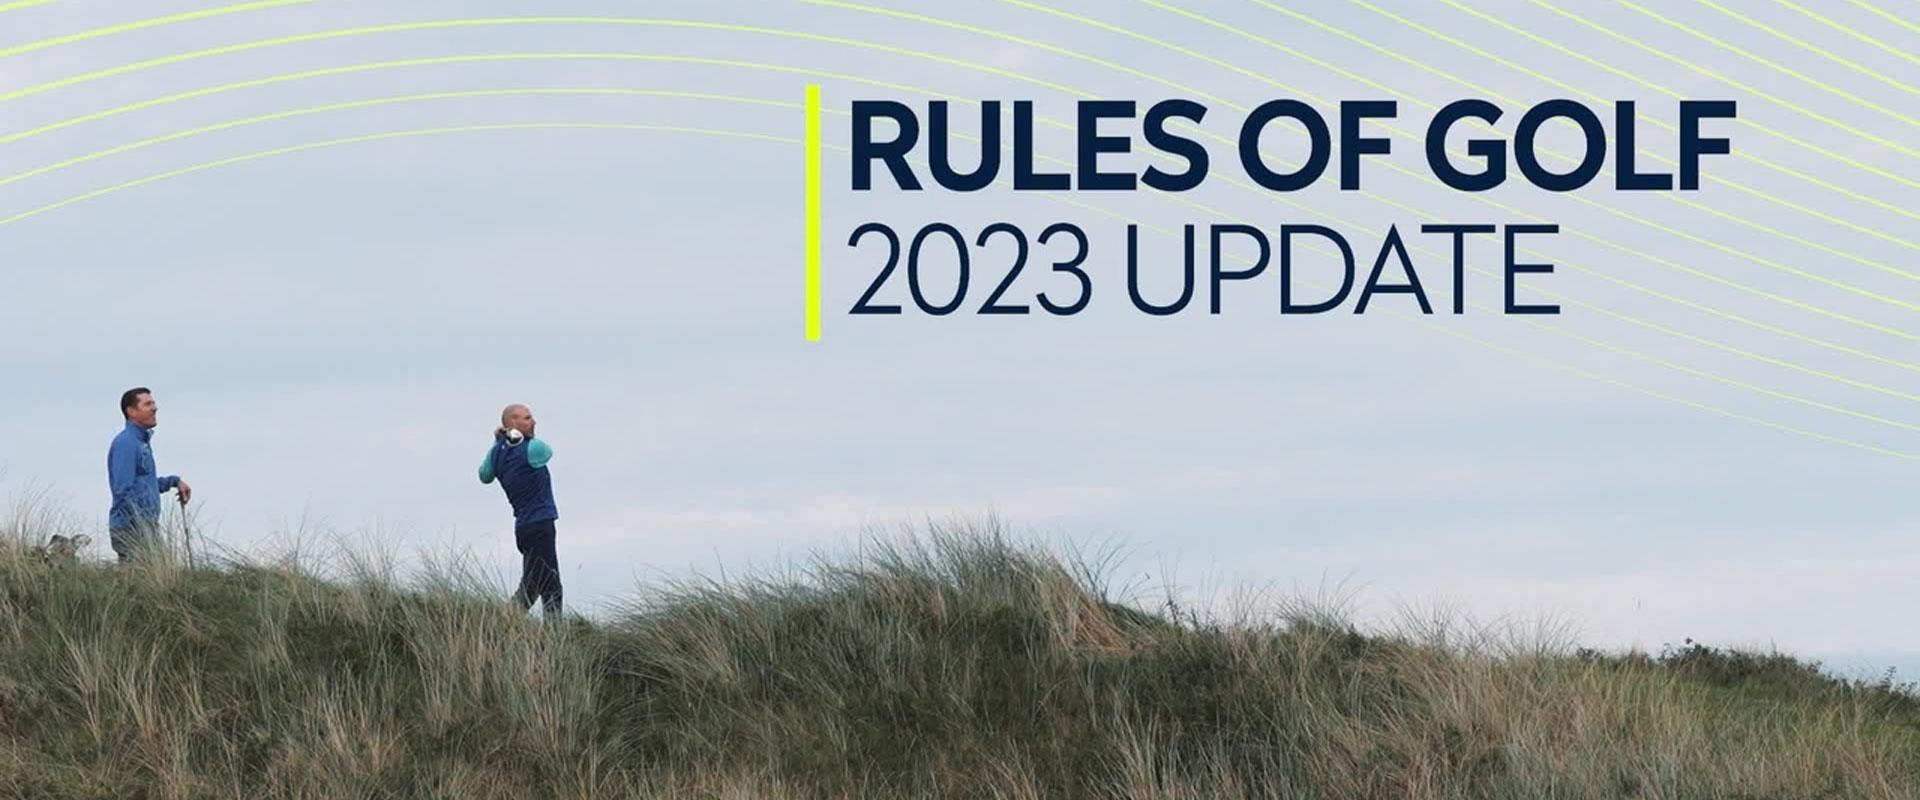 2023 Rules of Golf Changes what you need to know